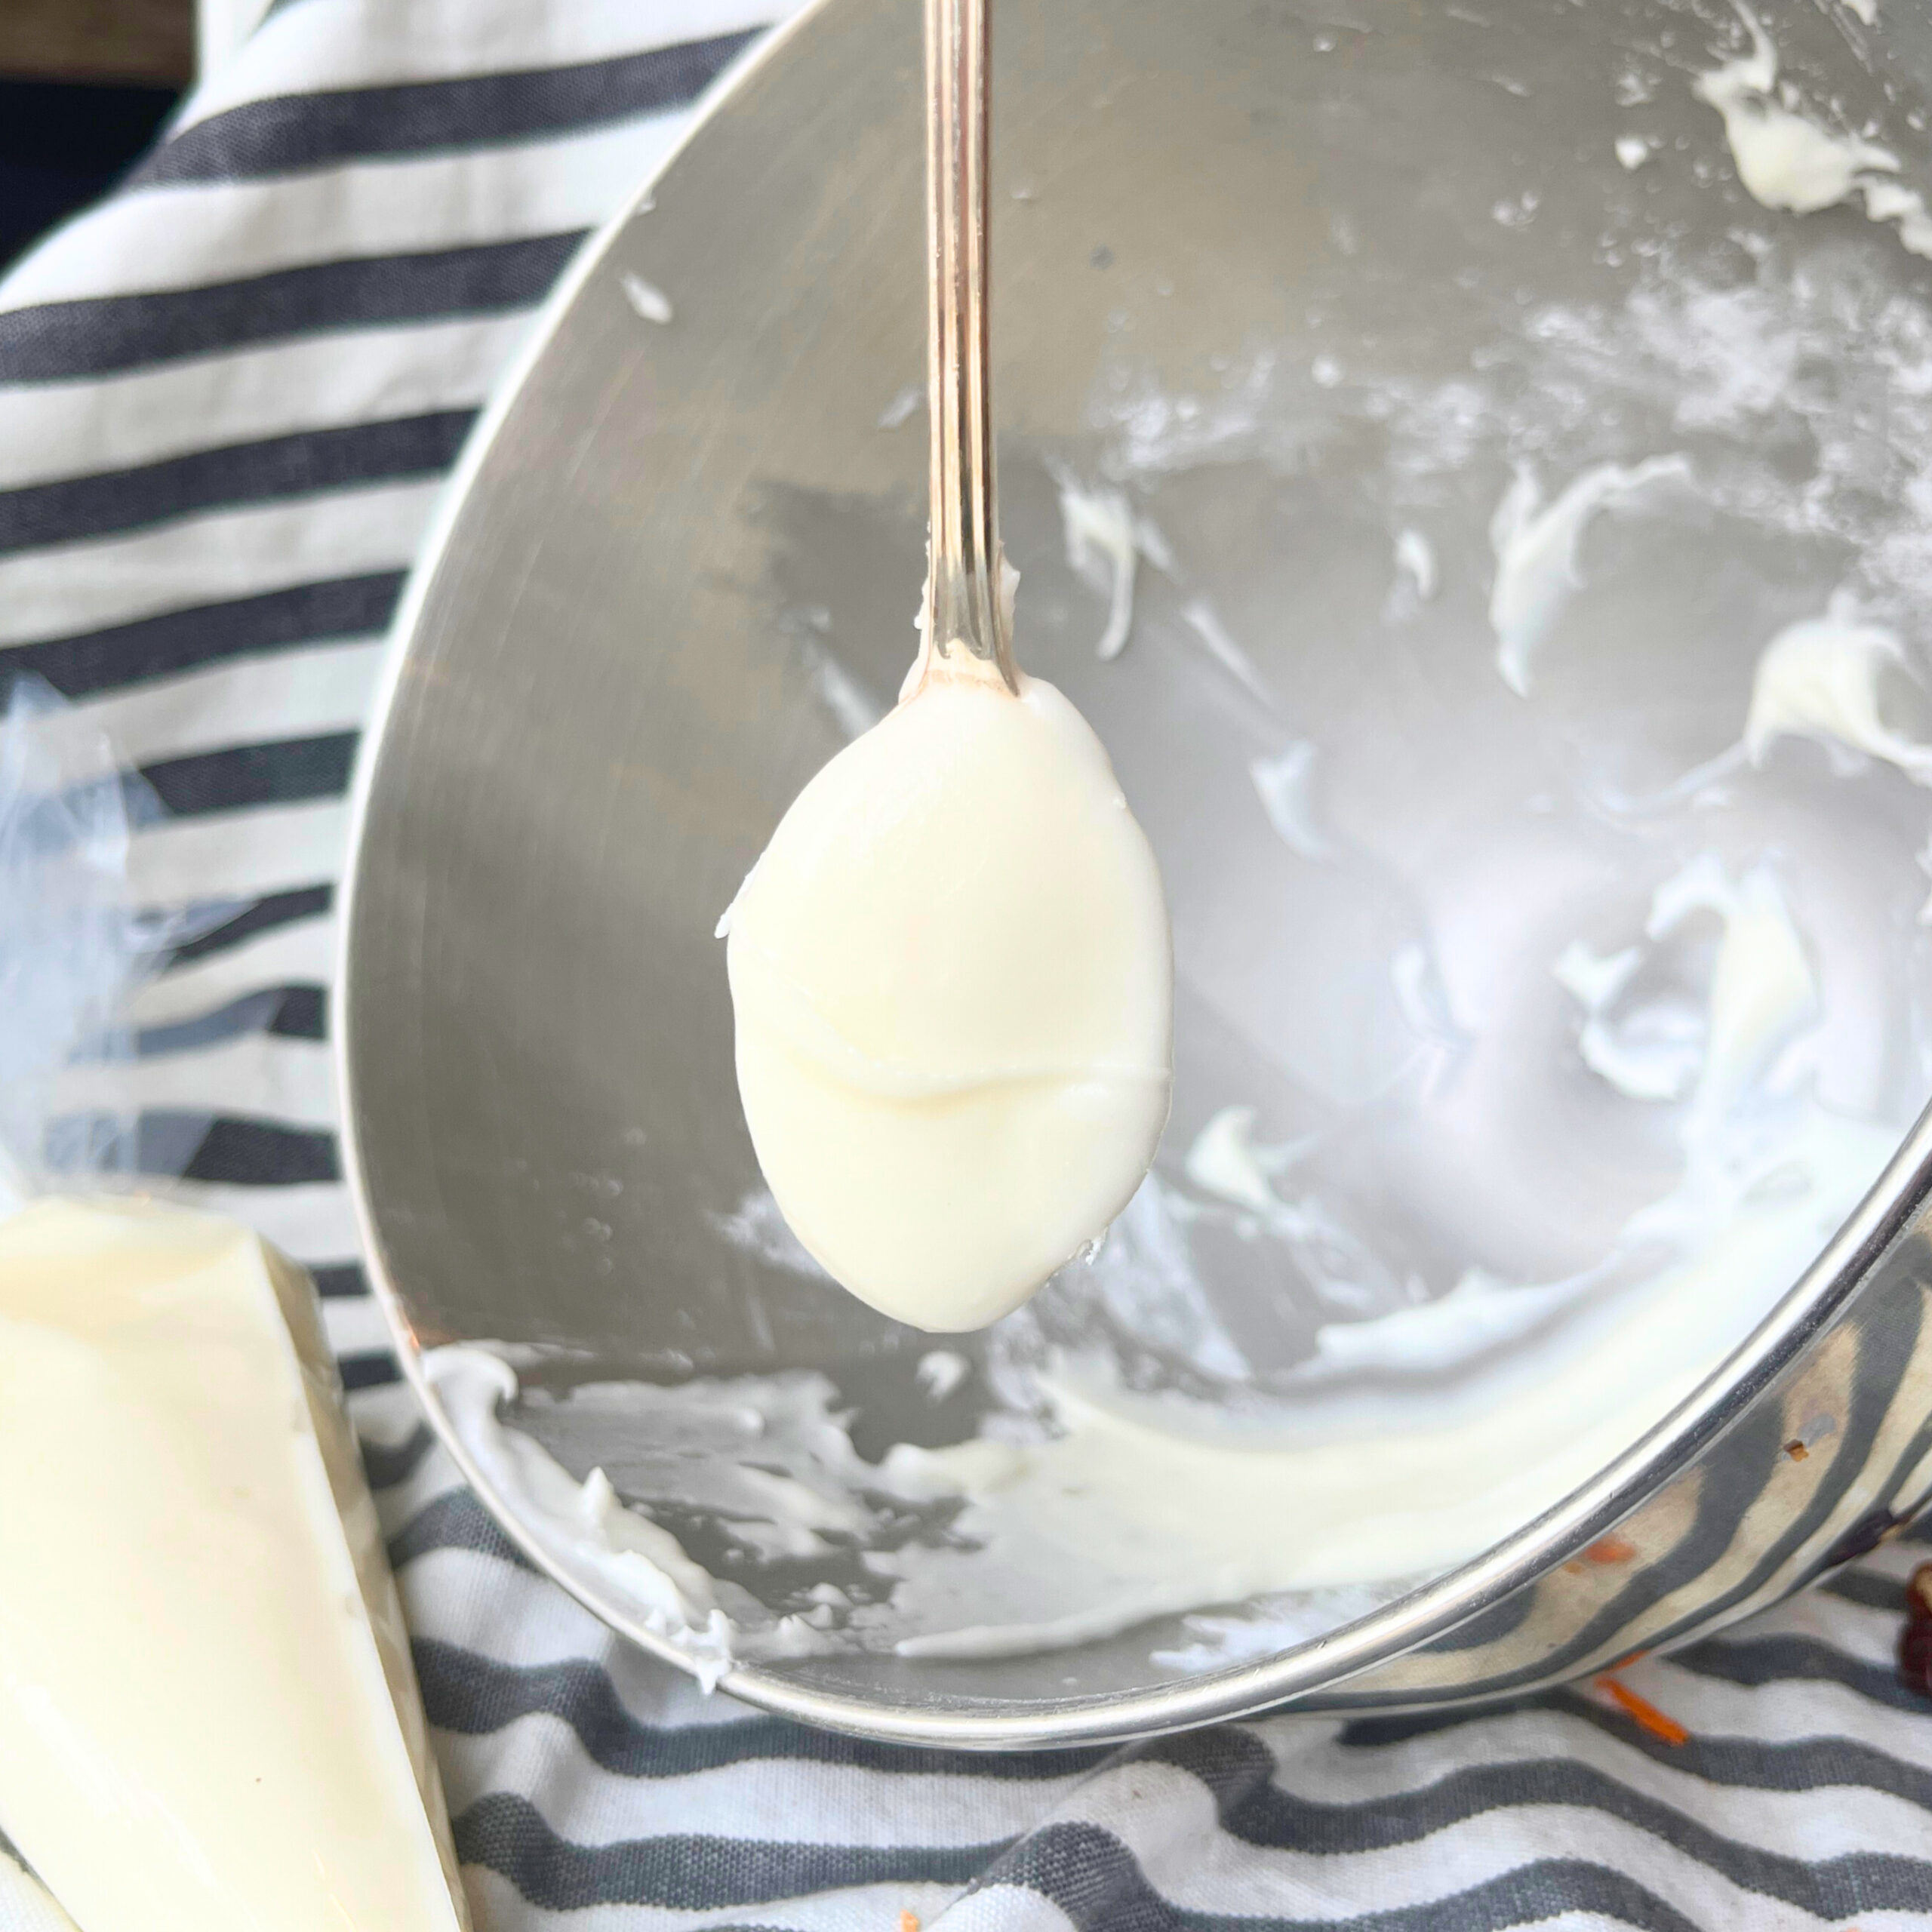 A mixing bowl with white icing inside. A piping bag with white icing inside and a spoon with white icing in the scoop.